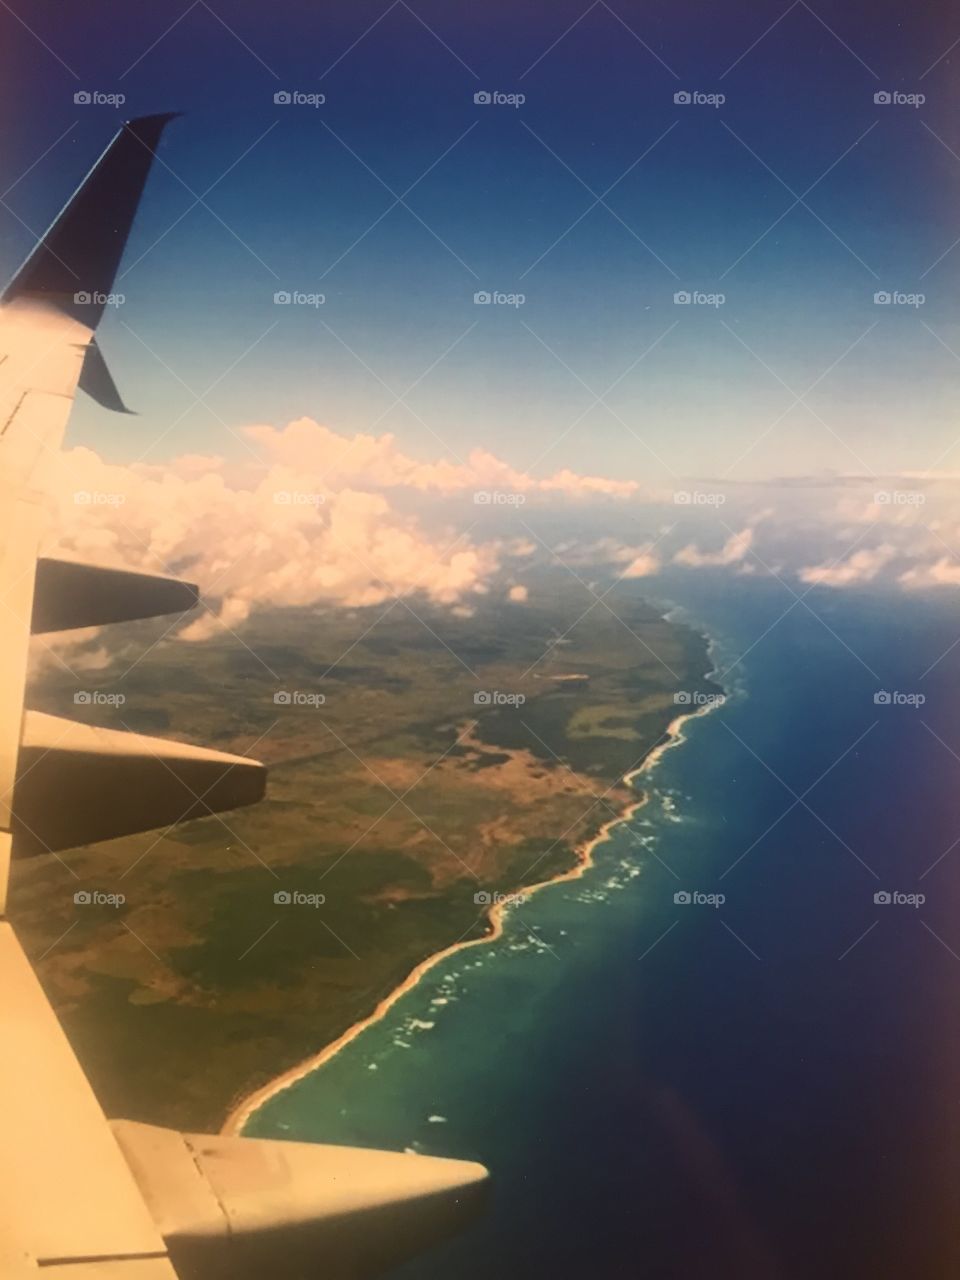 Airplane views of the Dominican Republic . Airplane window view